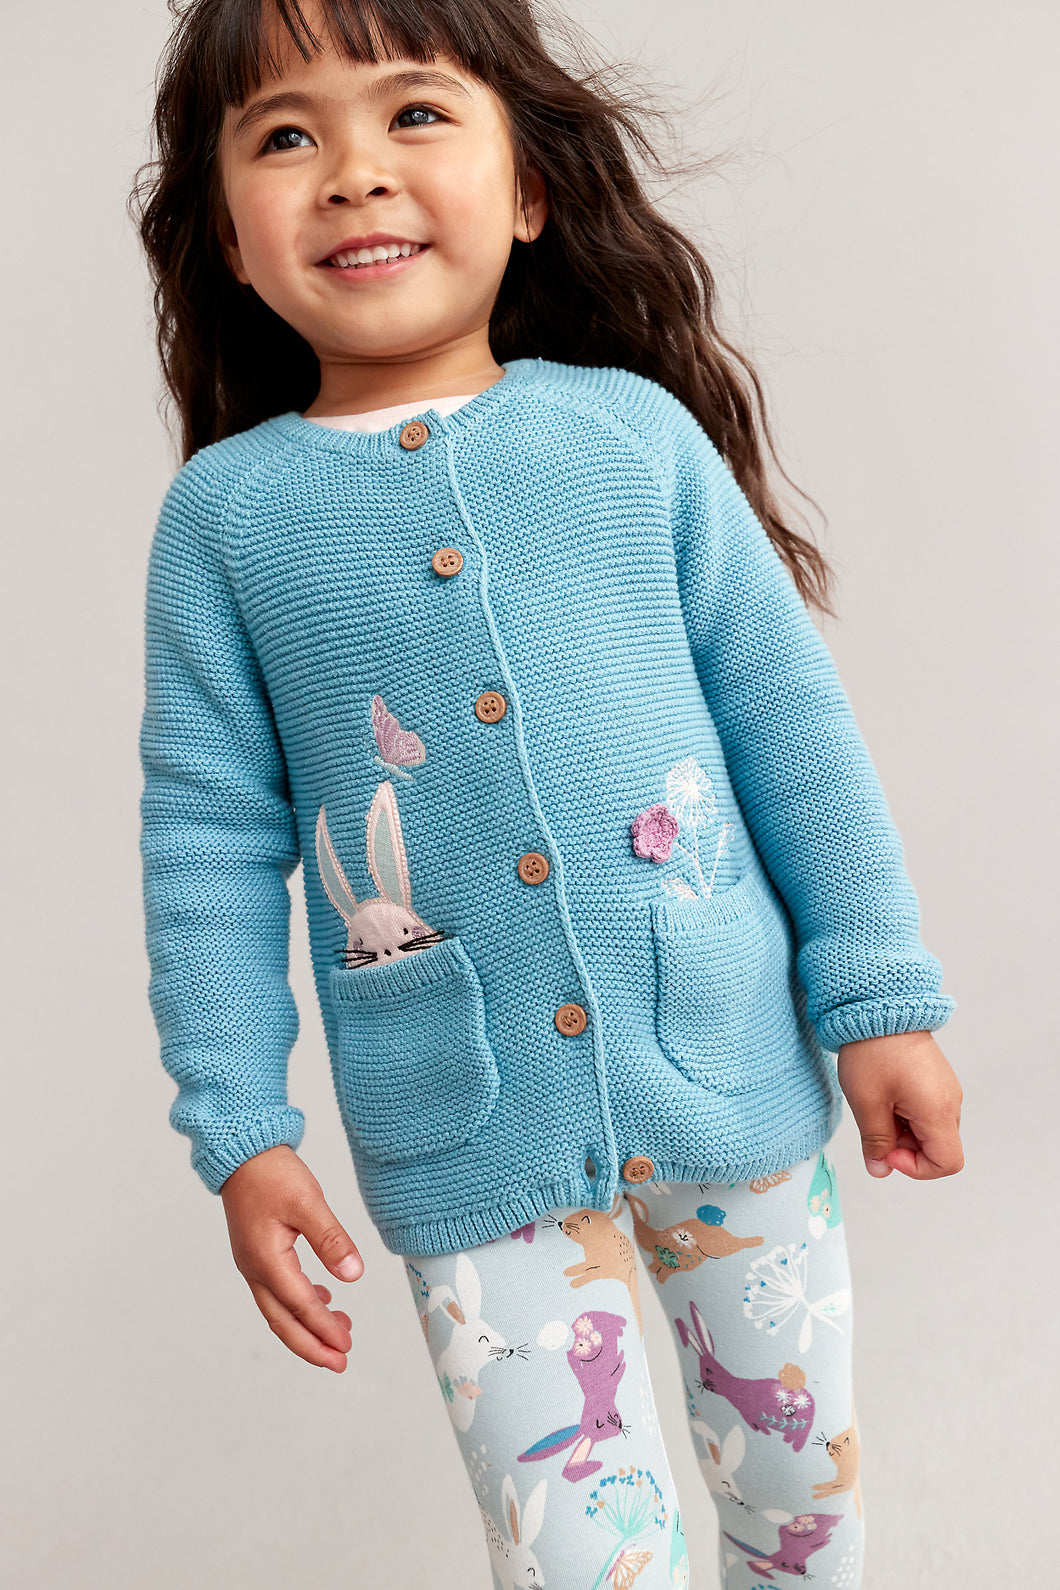 Mothercare Bunny Knitted Cardigan